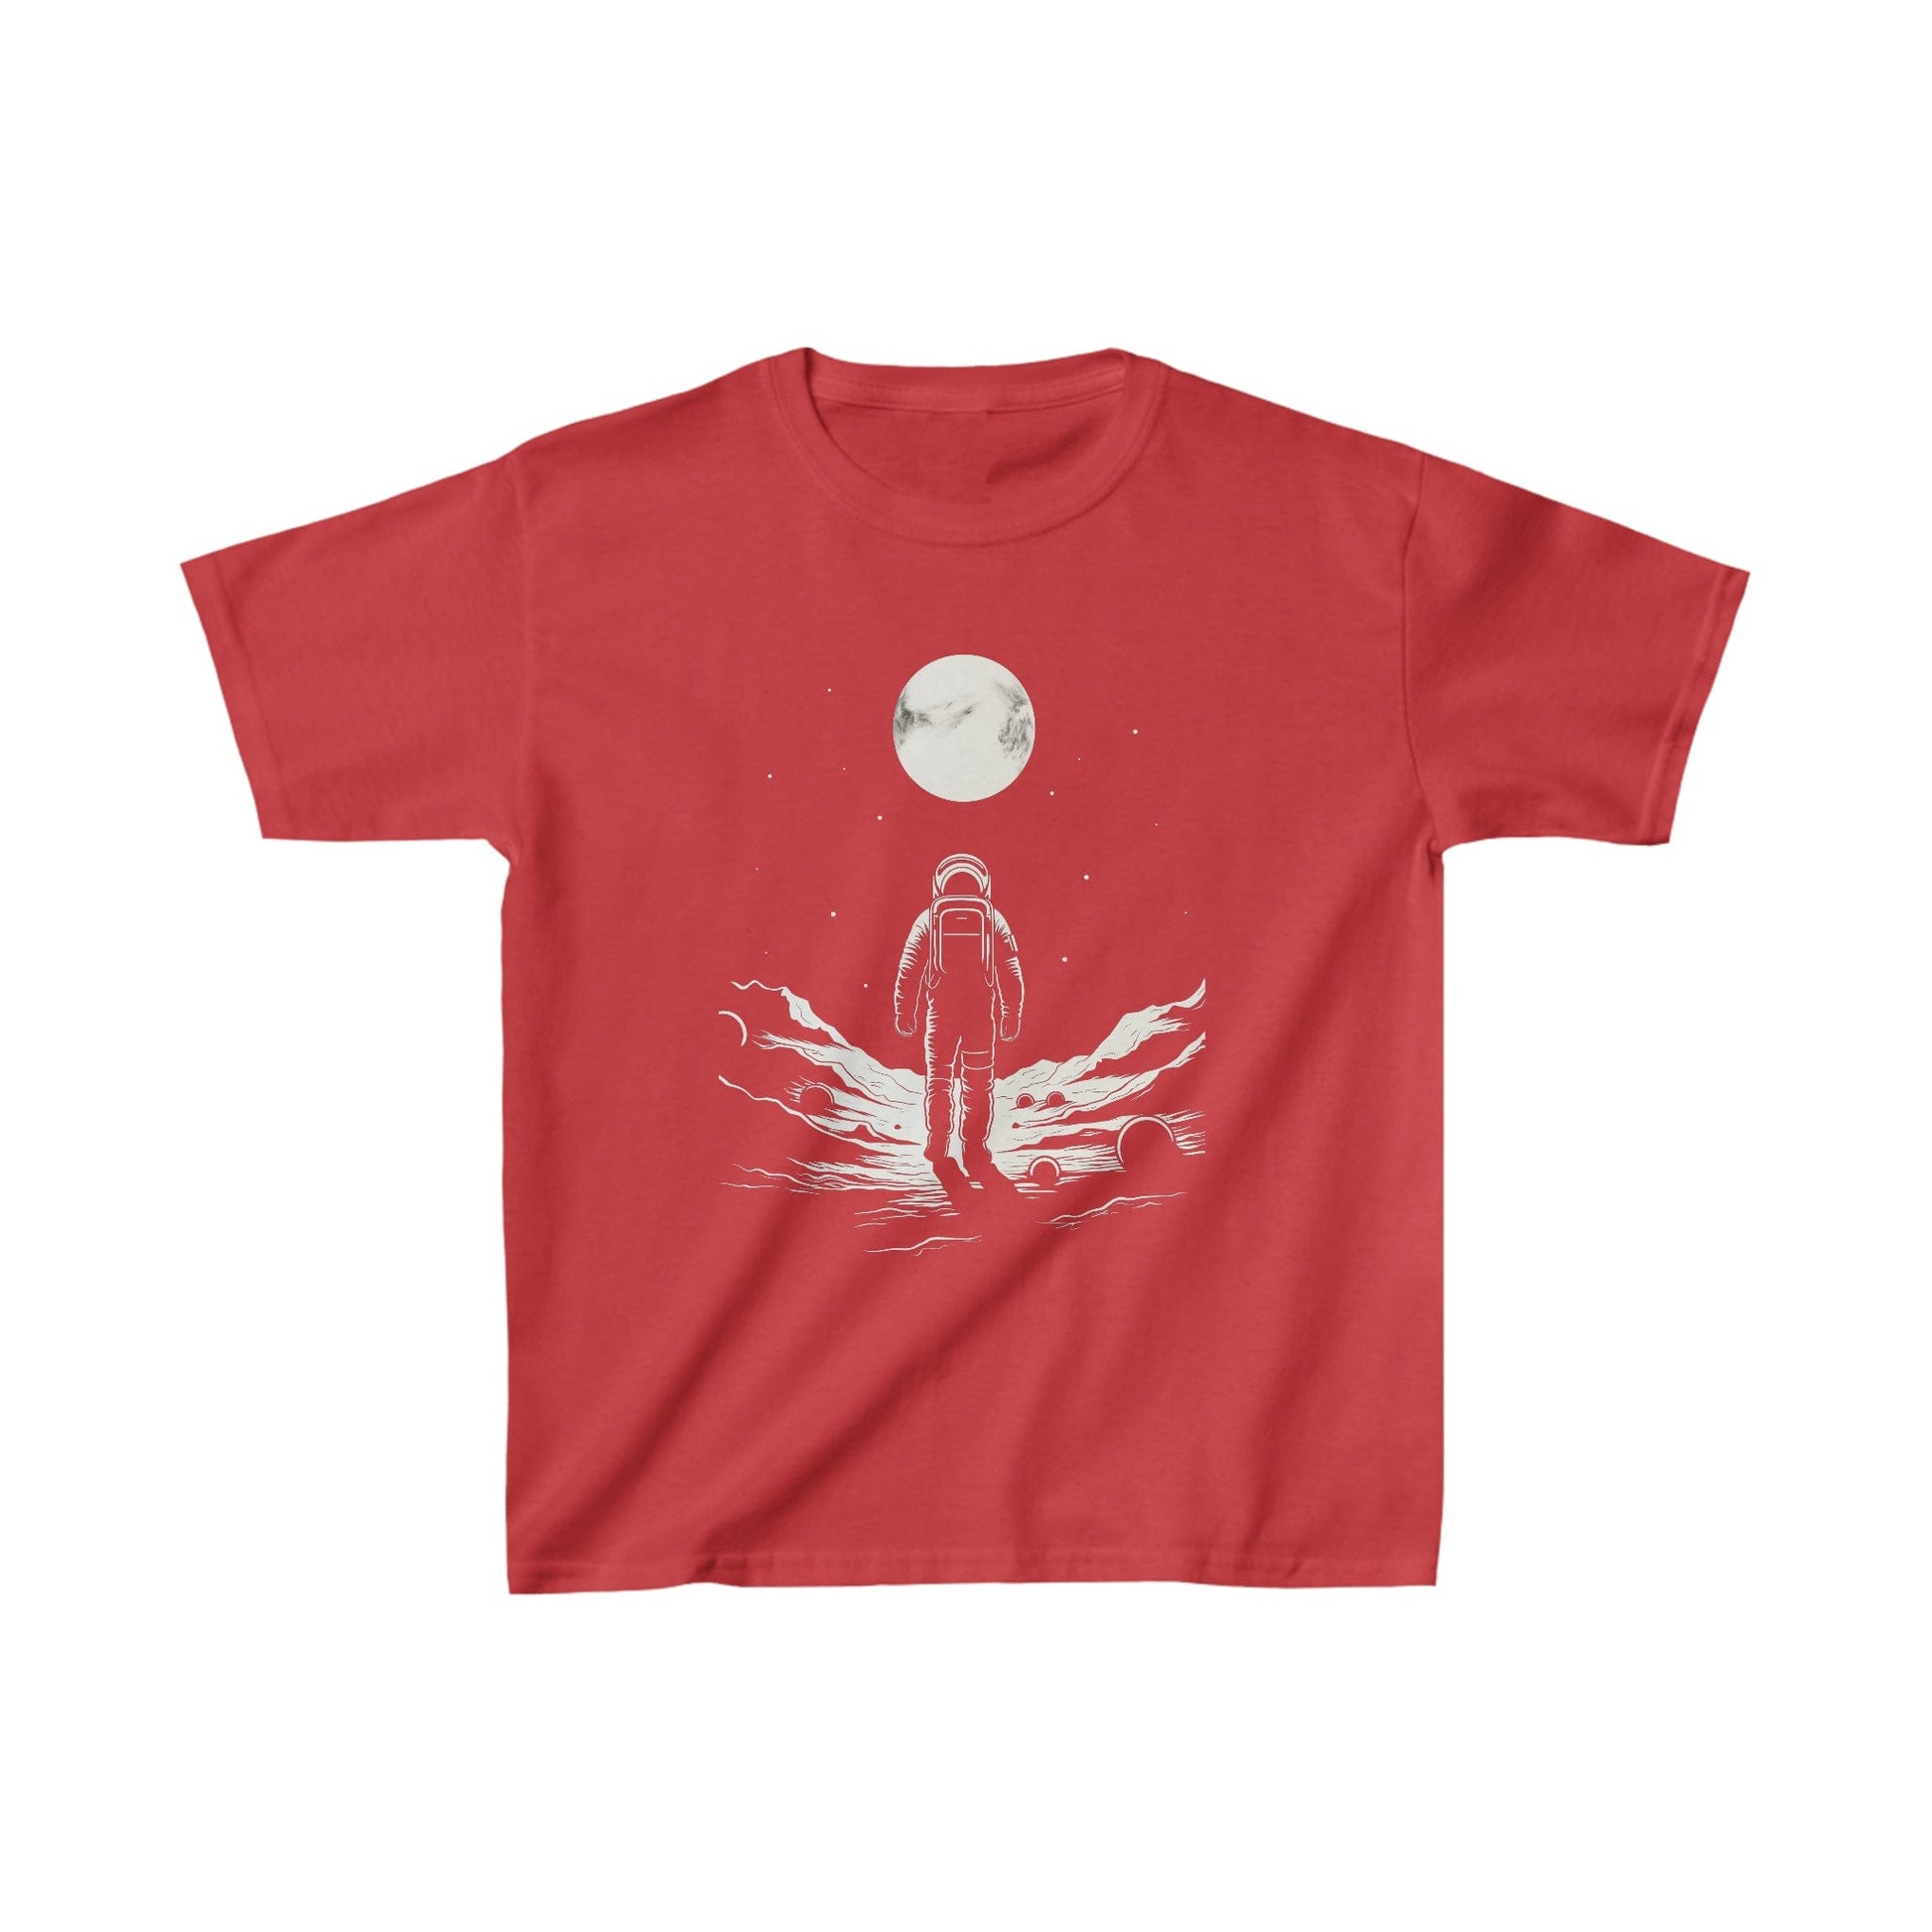 Kids clothes XS / Red Youth Lone Astronaut Moon Explorer T-Shirt